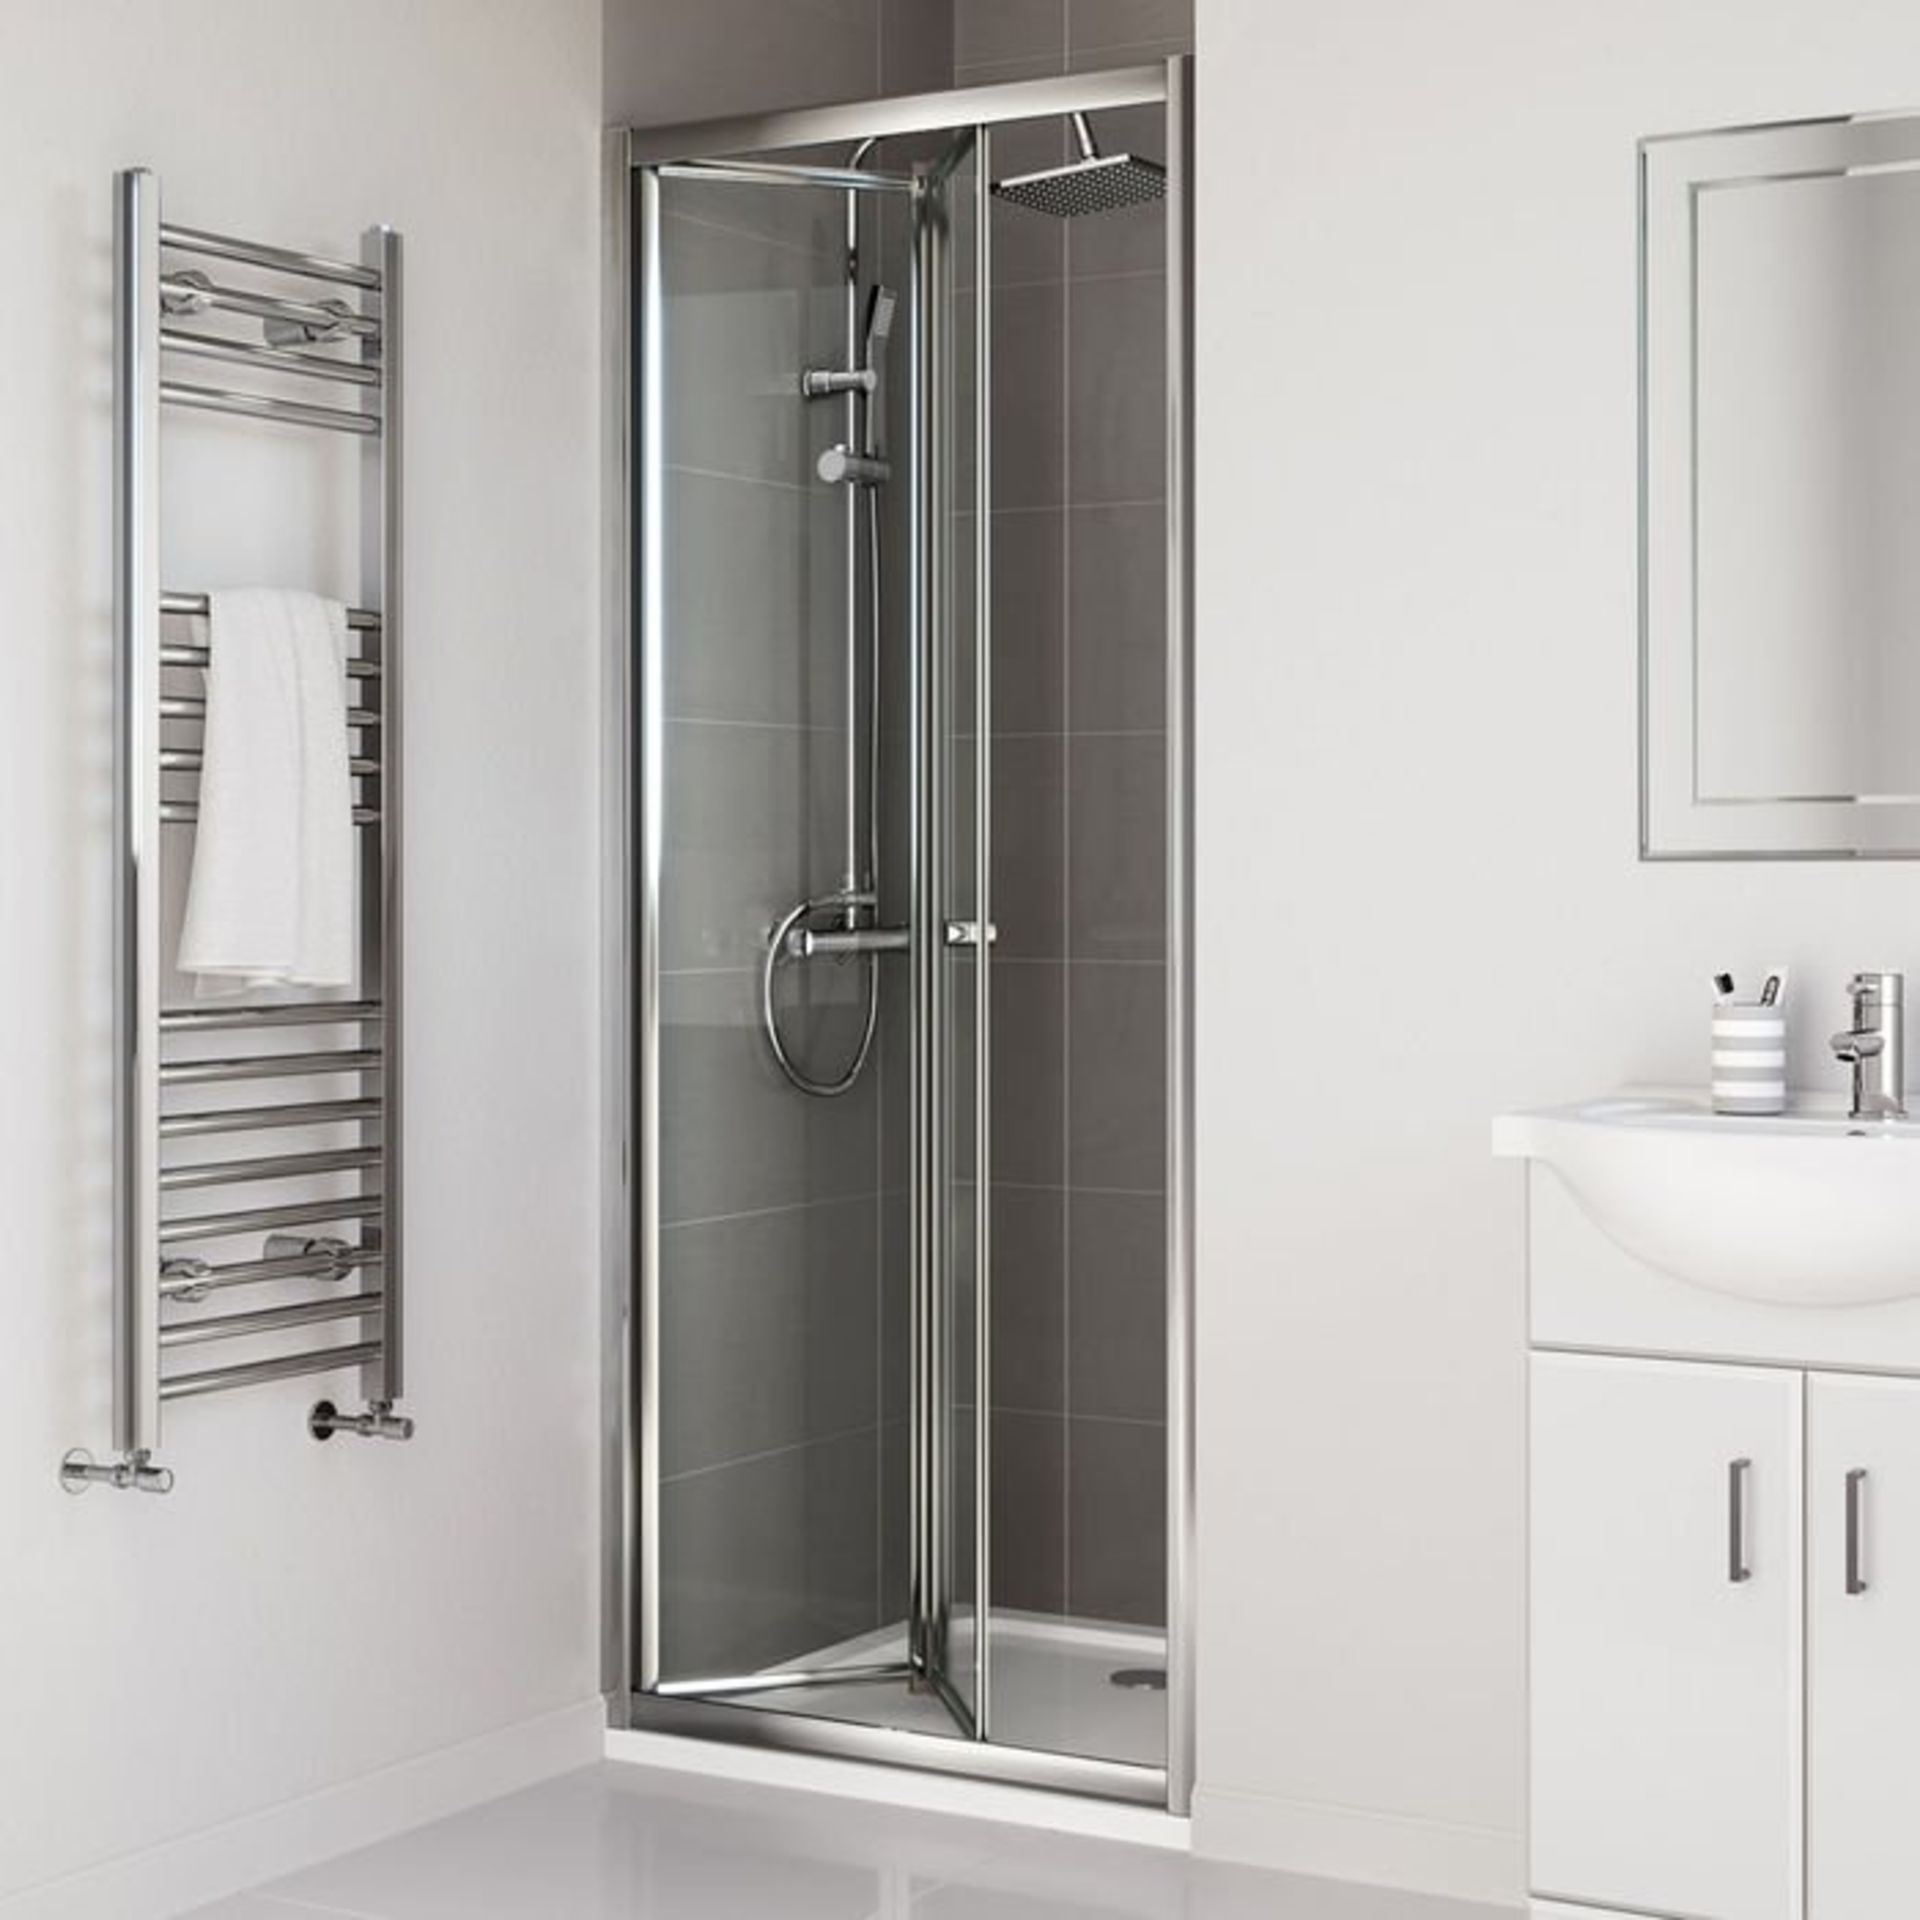 (A21) 900mm - Elements Bi Fold Shower Door RRP £299.99 4mm Safety Glass Fully waterproof tested with - Image 2 of 3